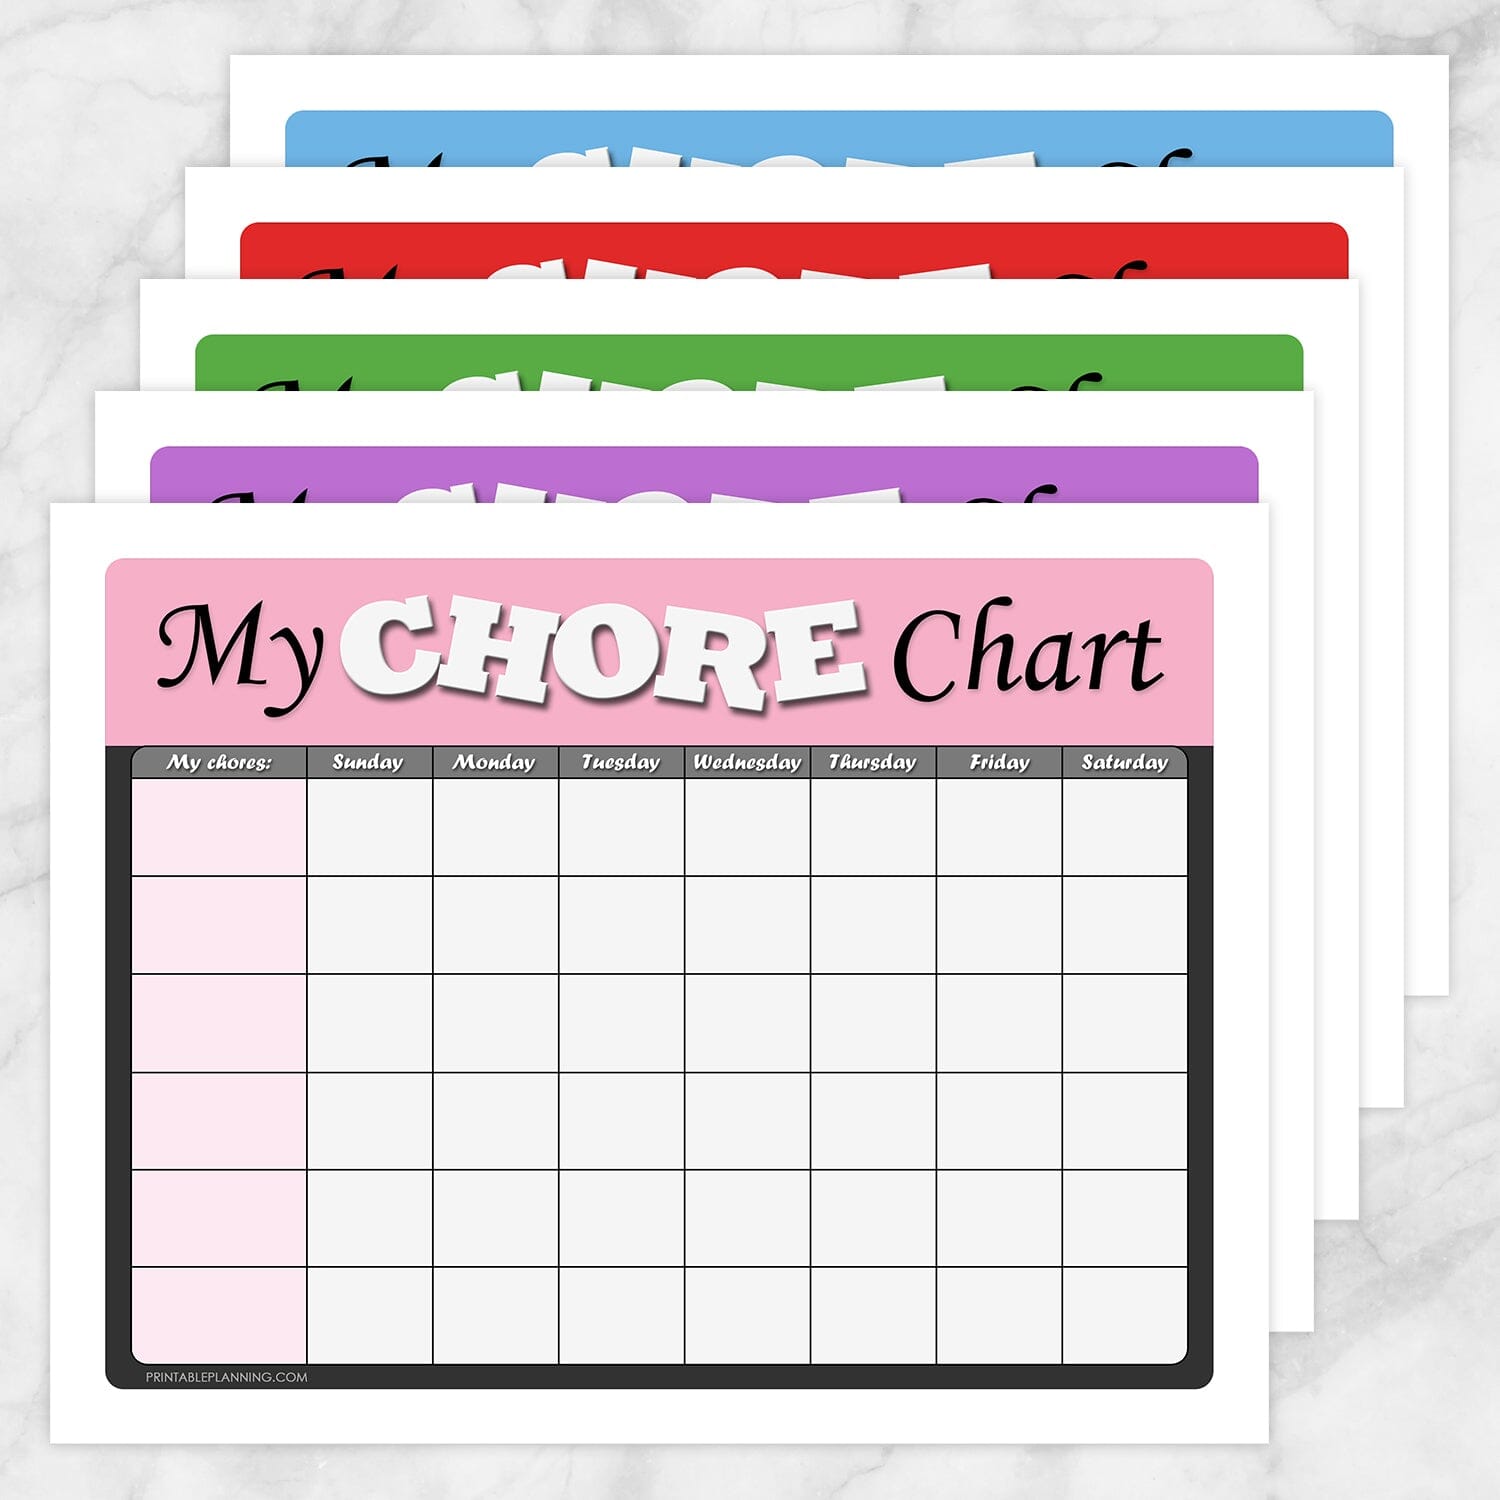 Kids Chore Chart - Red 'My Chore Chart' Weekly Page - Printable